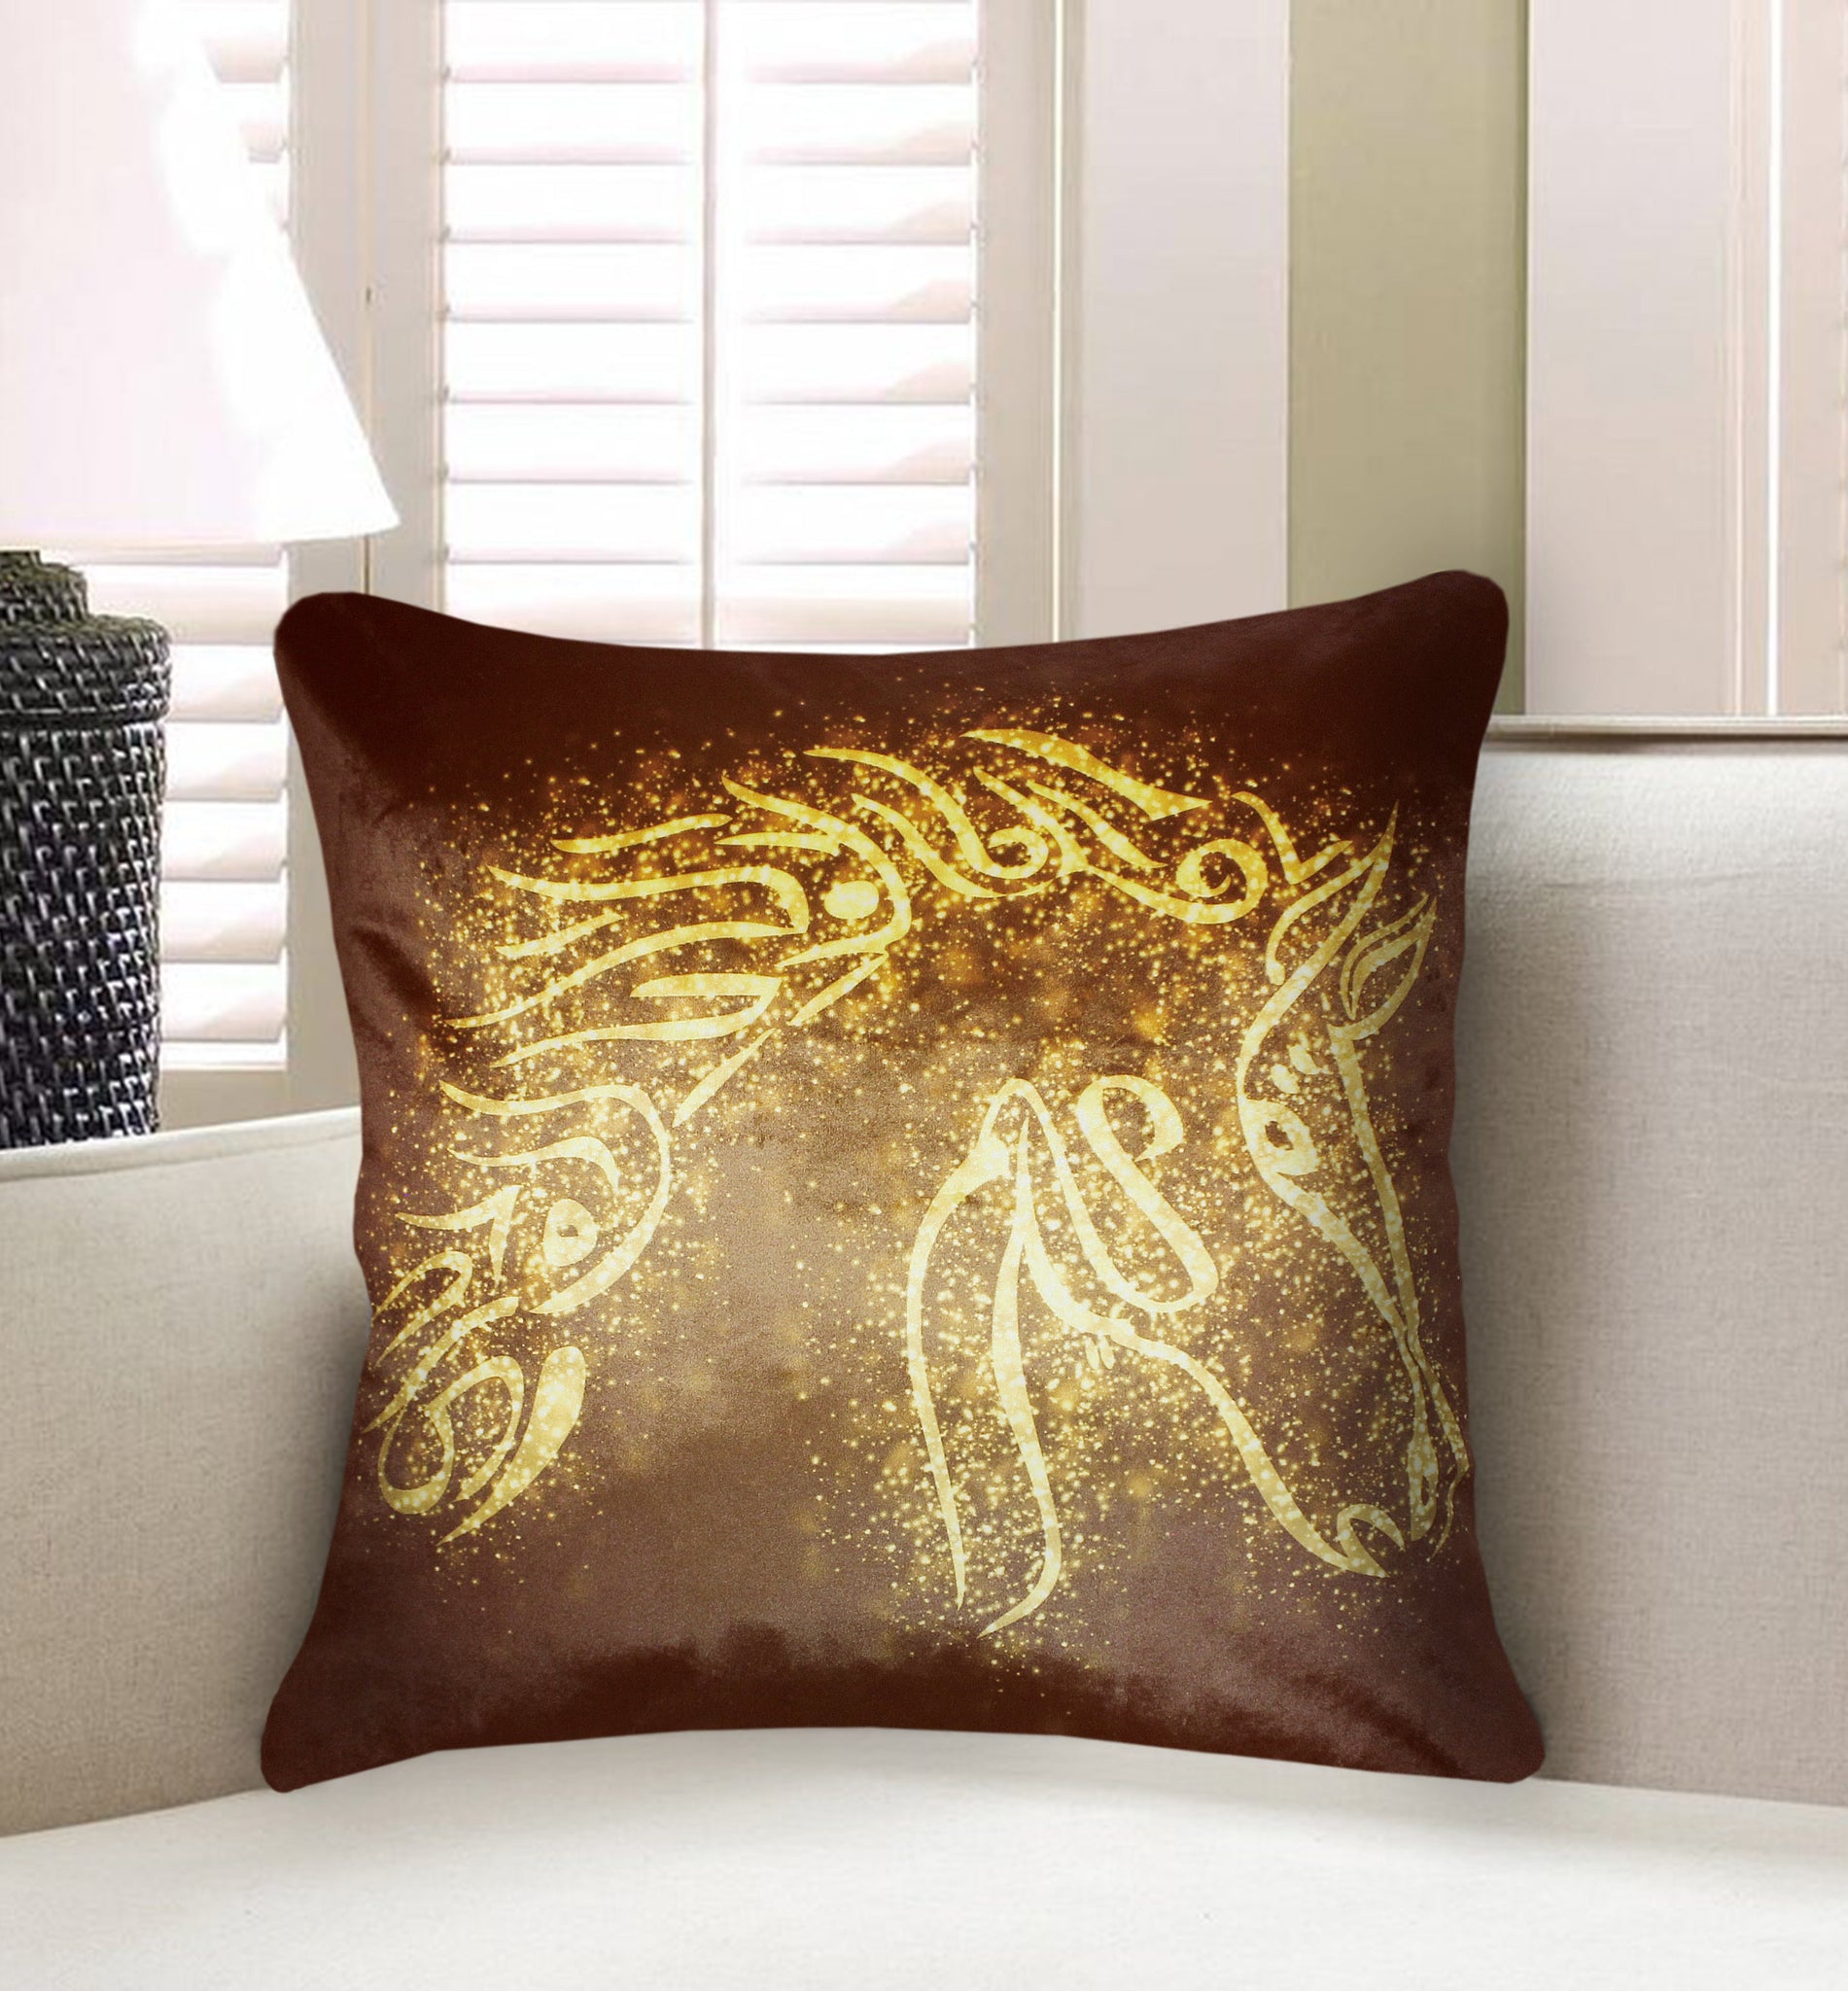 Brown Velvet Cushion Cover Abstract Horse Art Decorative Pillow Cover Home Decor Throw Pillow for Sofa Chair Living Room 45x45 cm 18x18 In